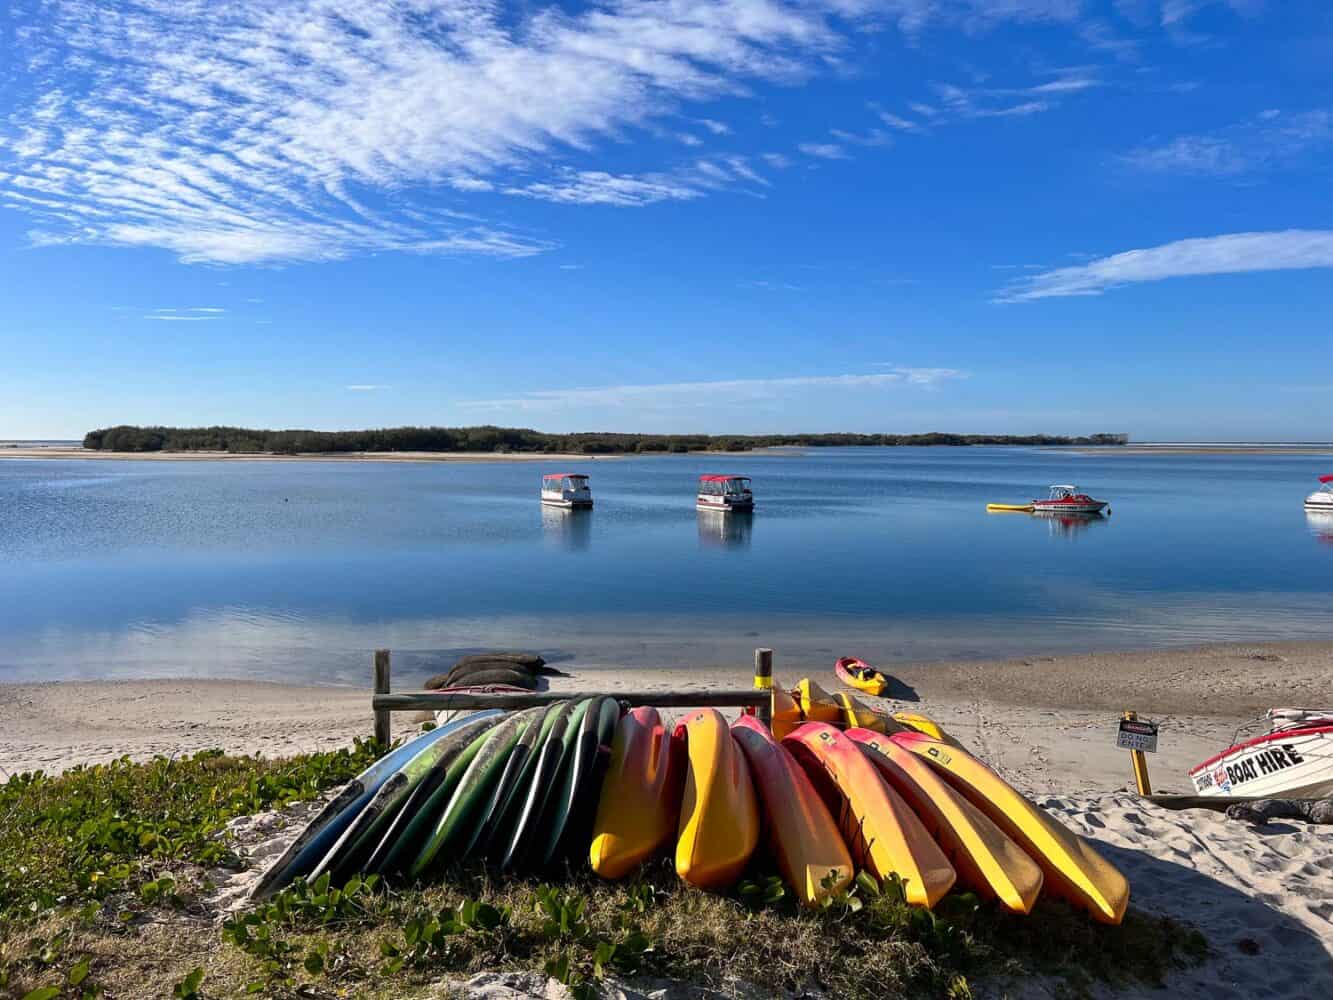 Kayaks for hire at Bill's Boats, Caloundra, Queensland, Australia